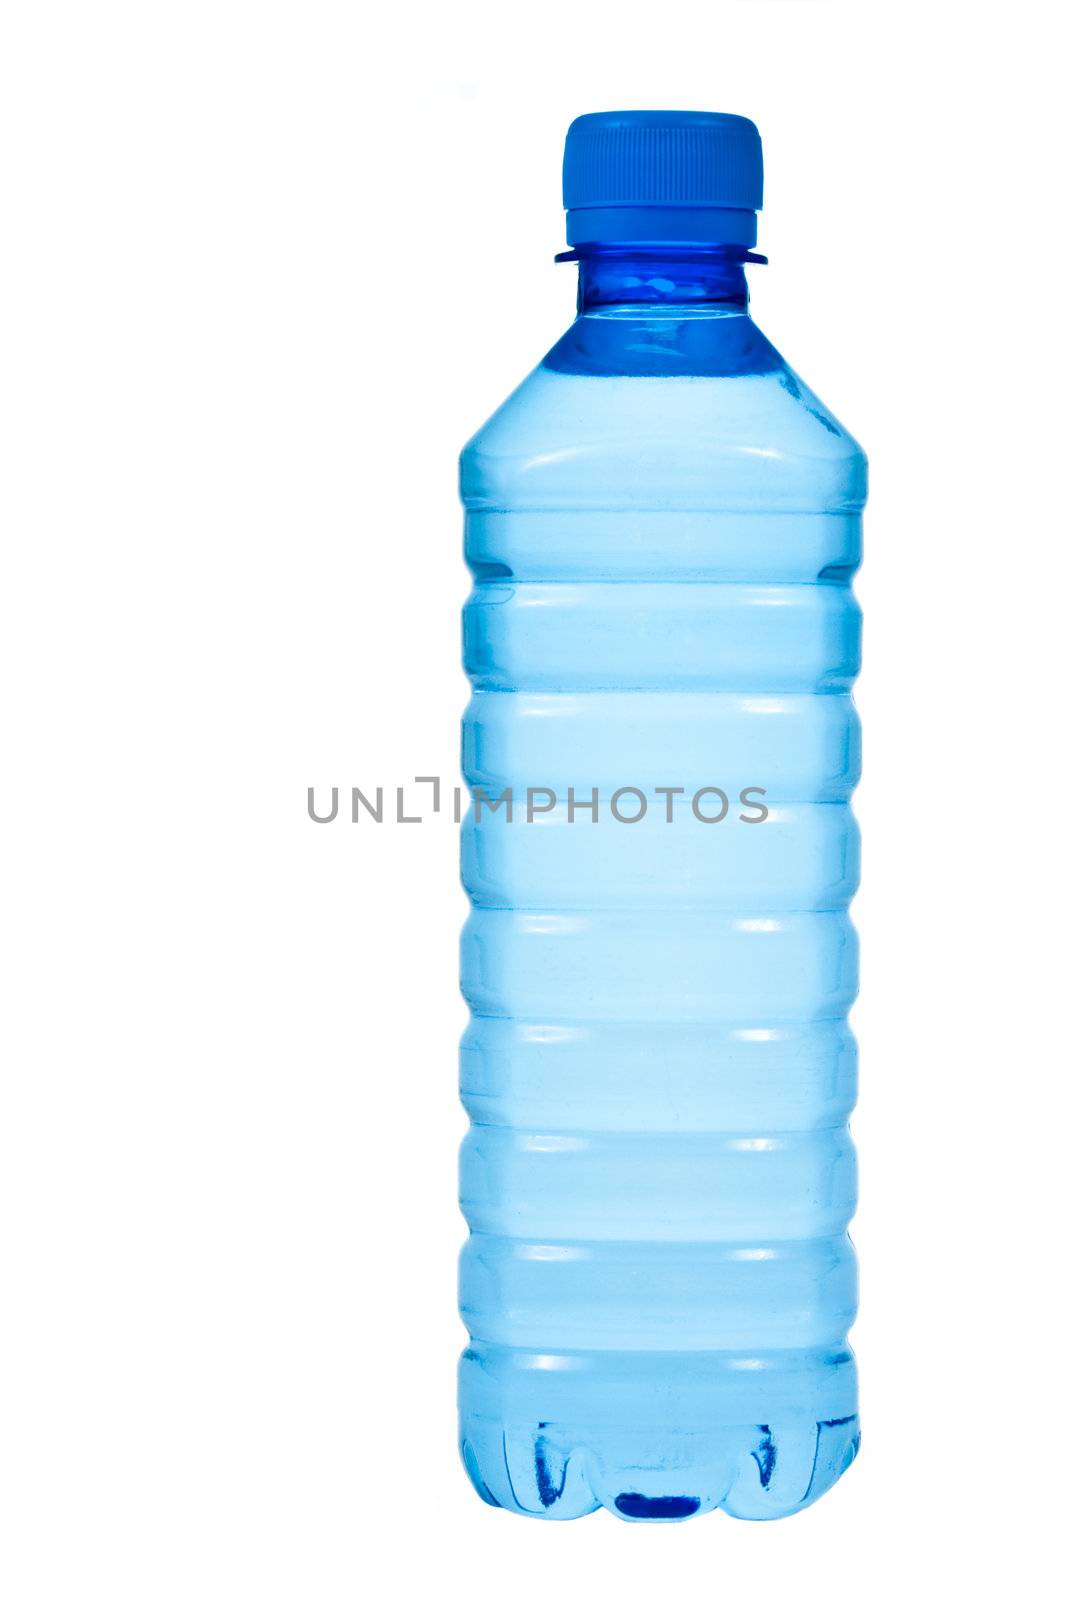 PET bottle with drinking water isolated on white